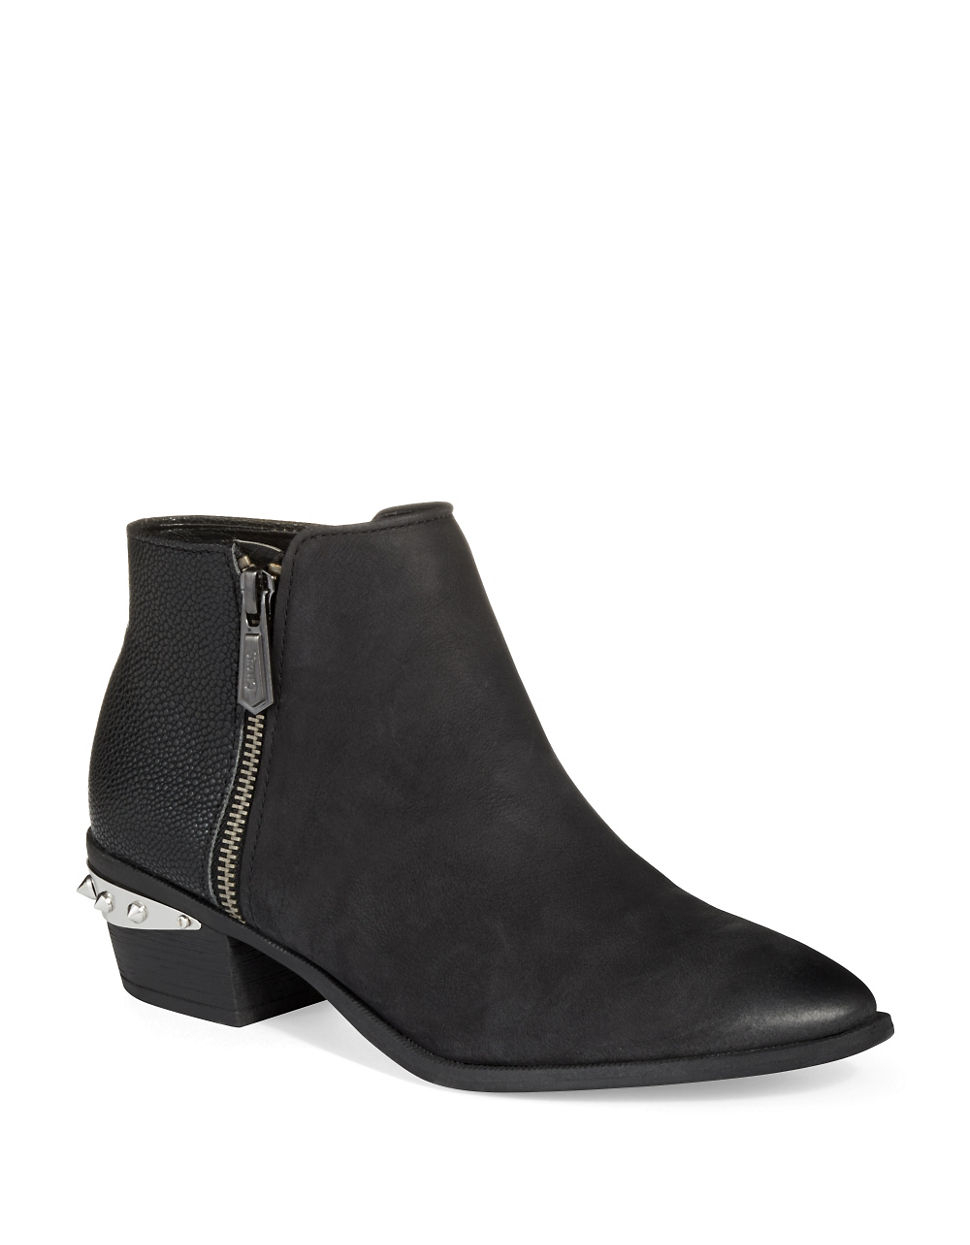 Lyst - Circus By Sam Edelman Holt Ankle Boot in Black